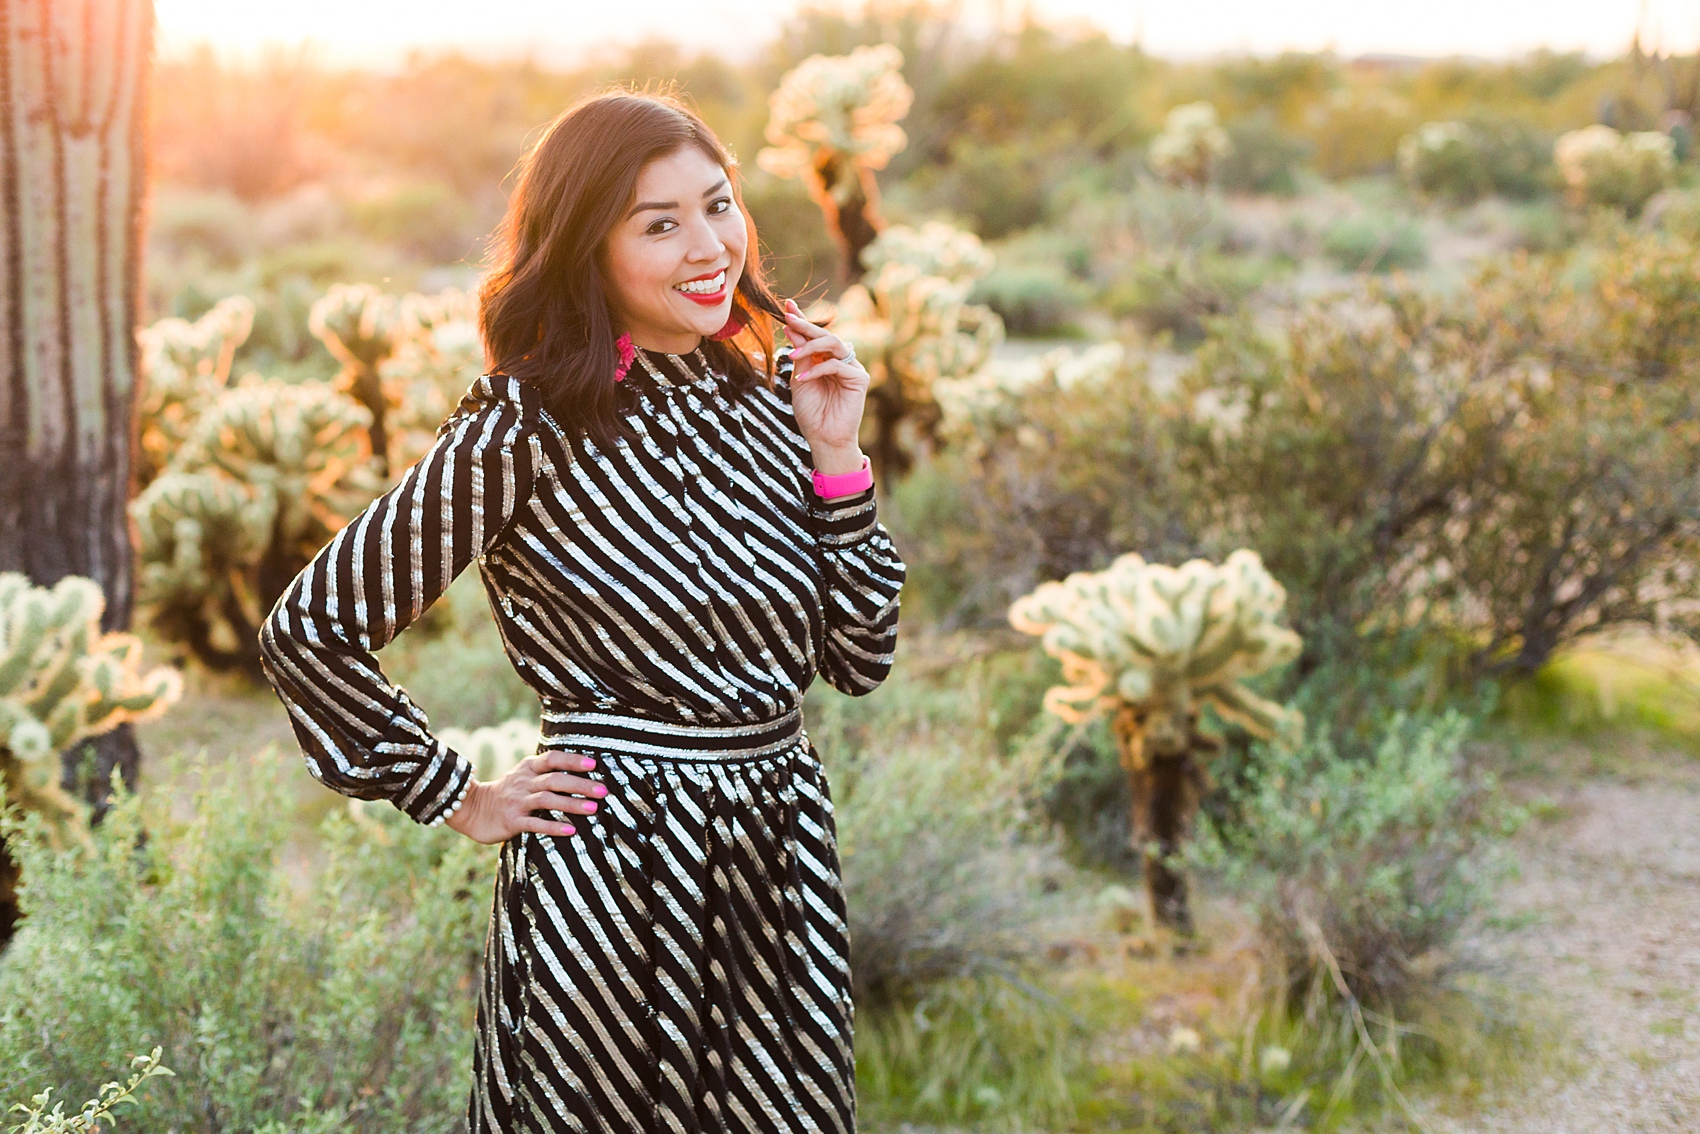 Leah Hope Photography | Scottsdale Phoenix Arizona Photographer | Desert Landscape Cactus Mountain Scenery Sunset Colors | Fitness Lifestyle Women Portraits | Brand Pictures | What to Wear